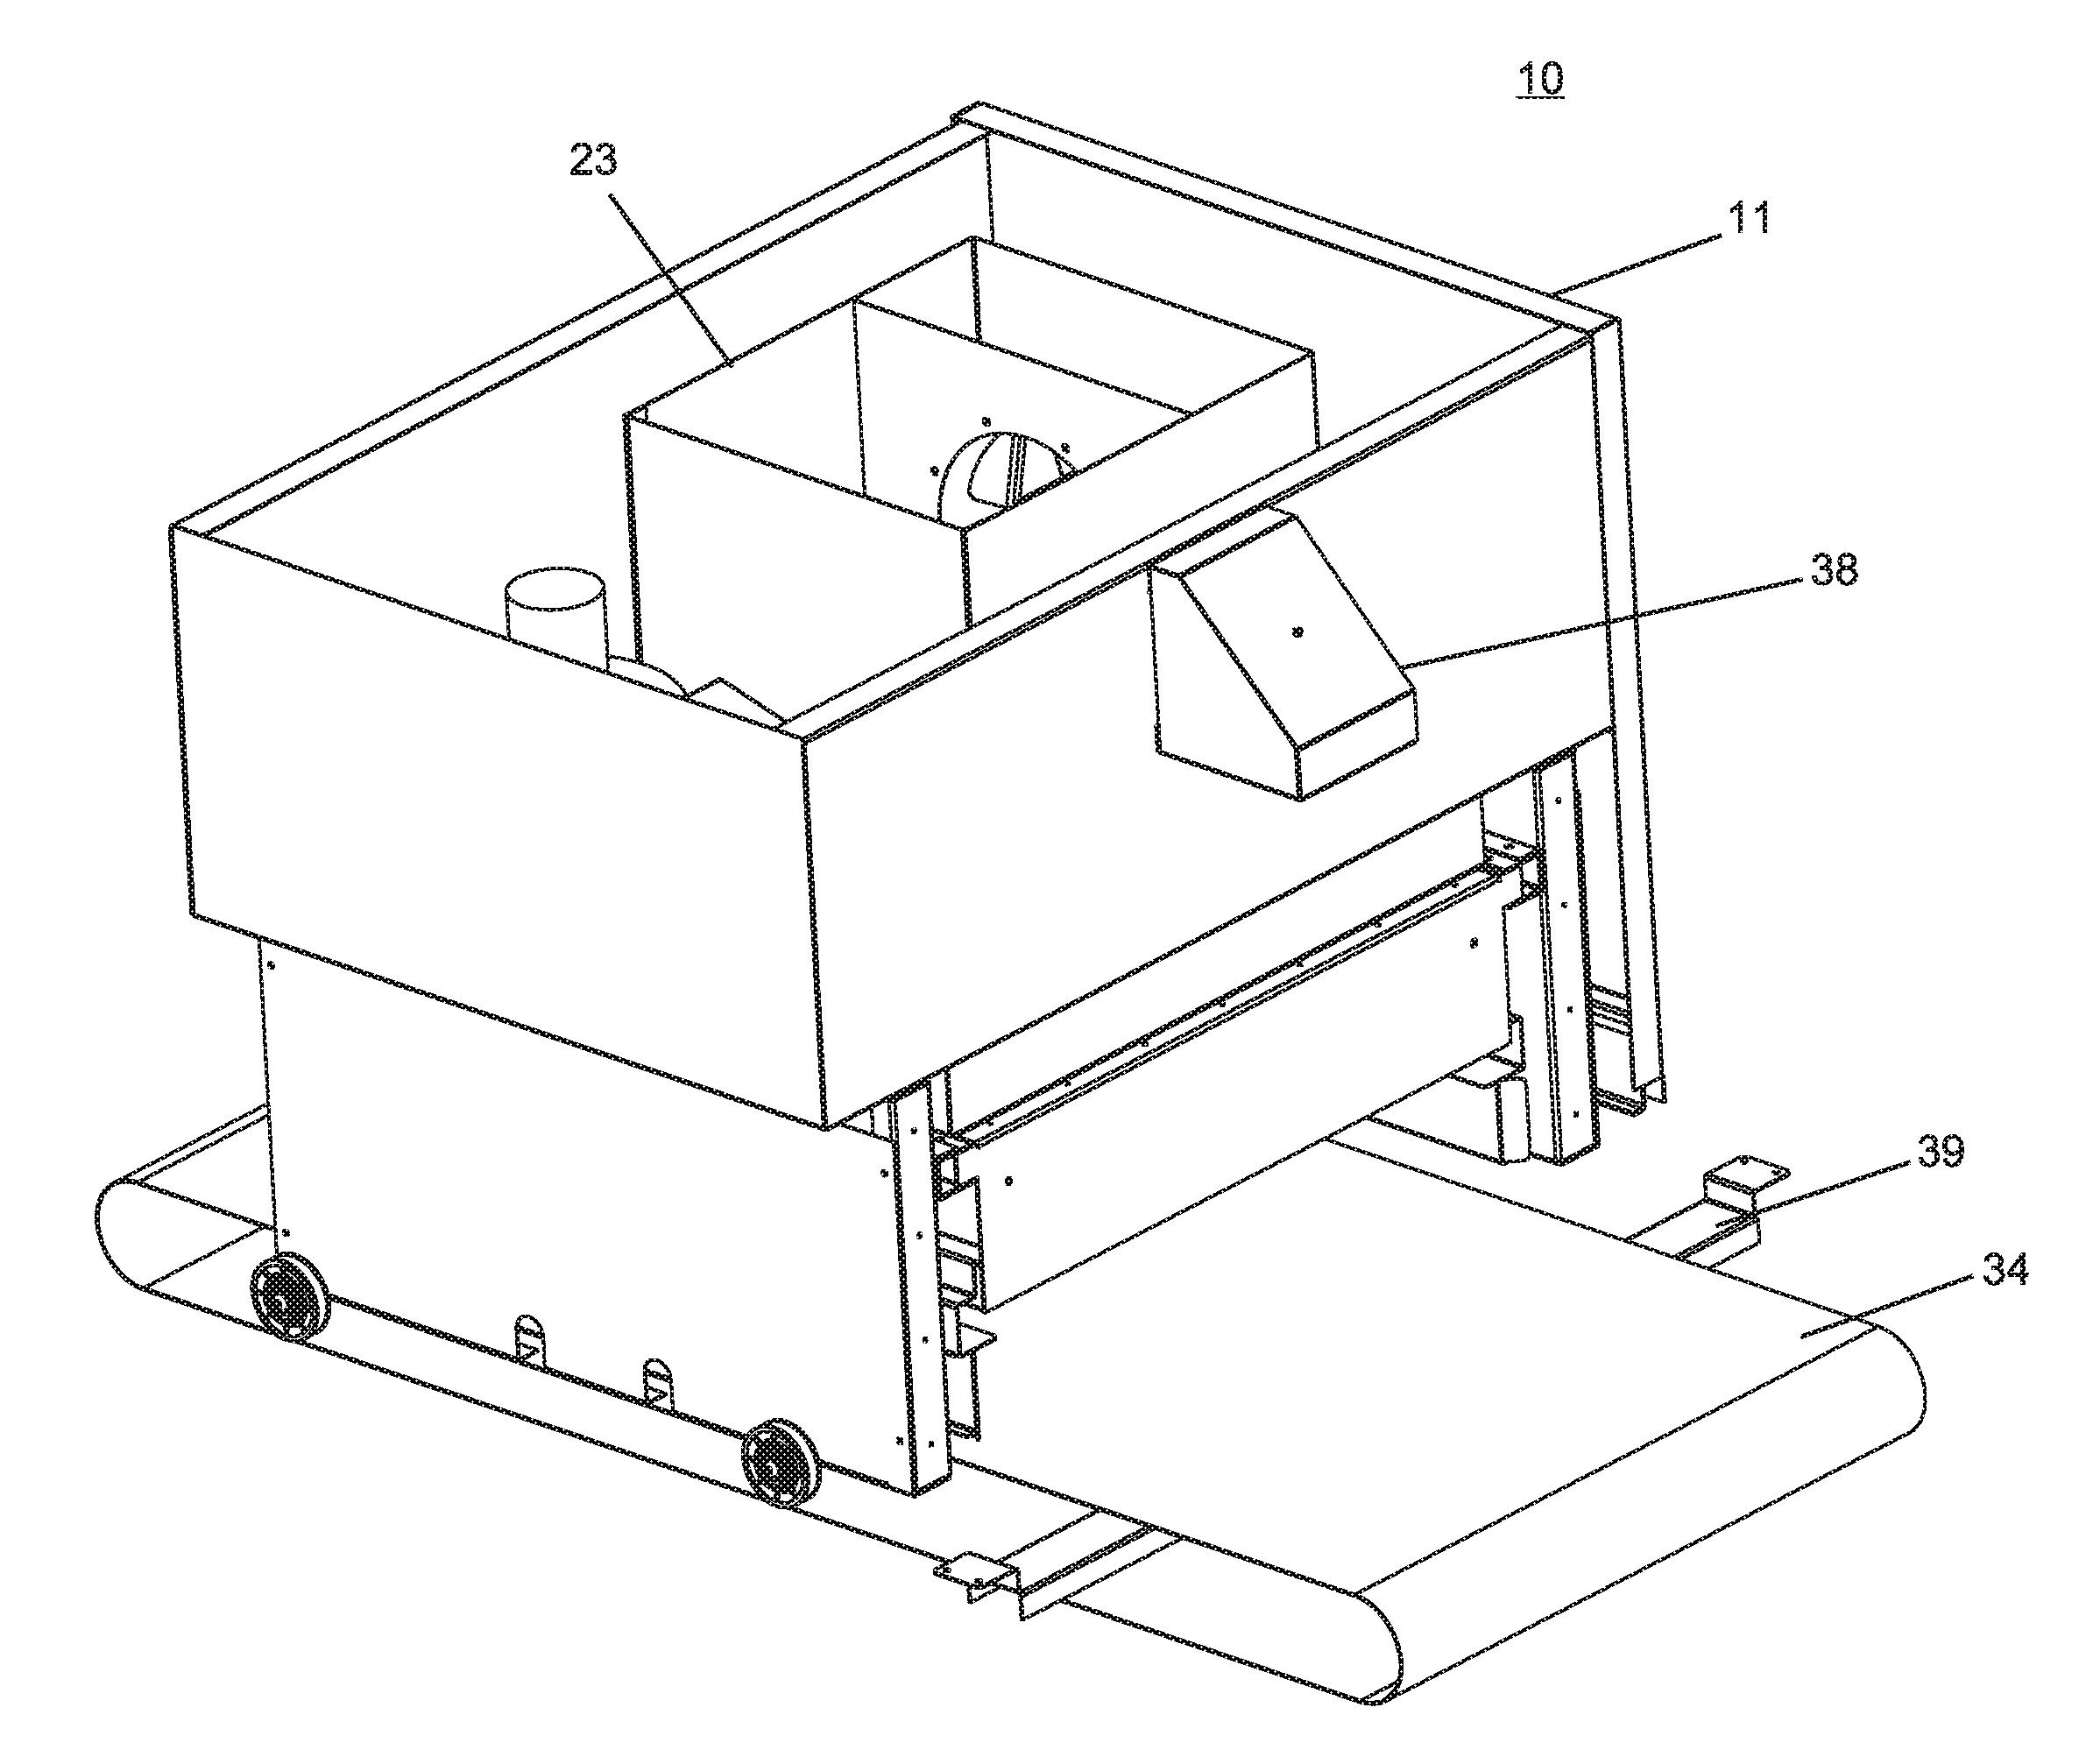 Ink curing apparatus and method